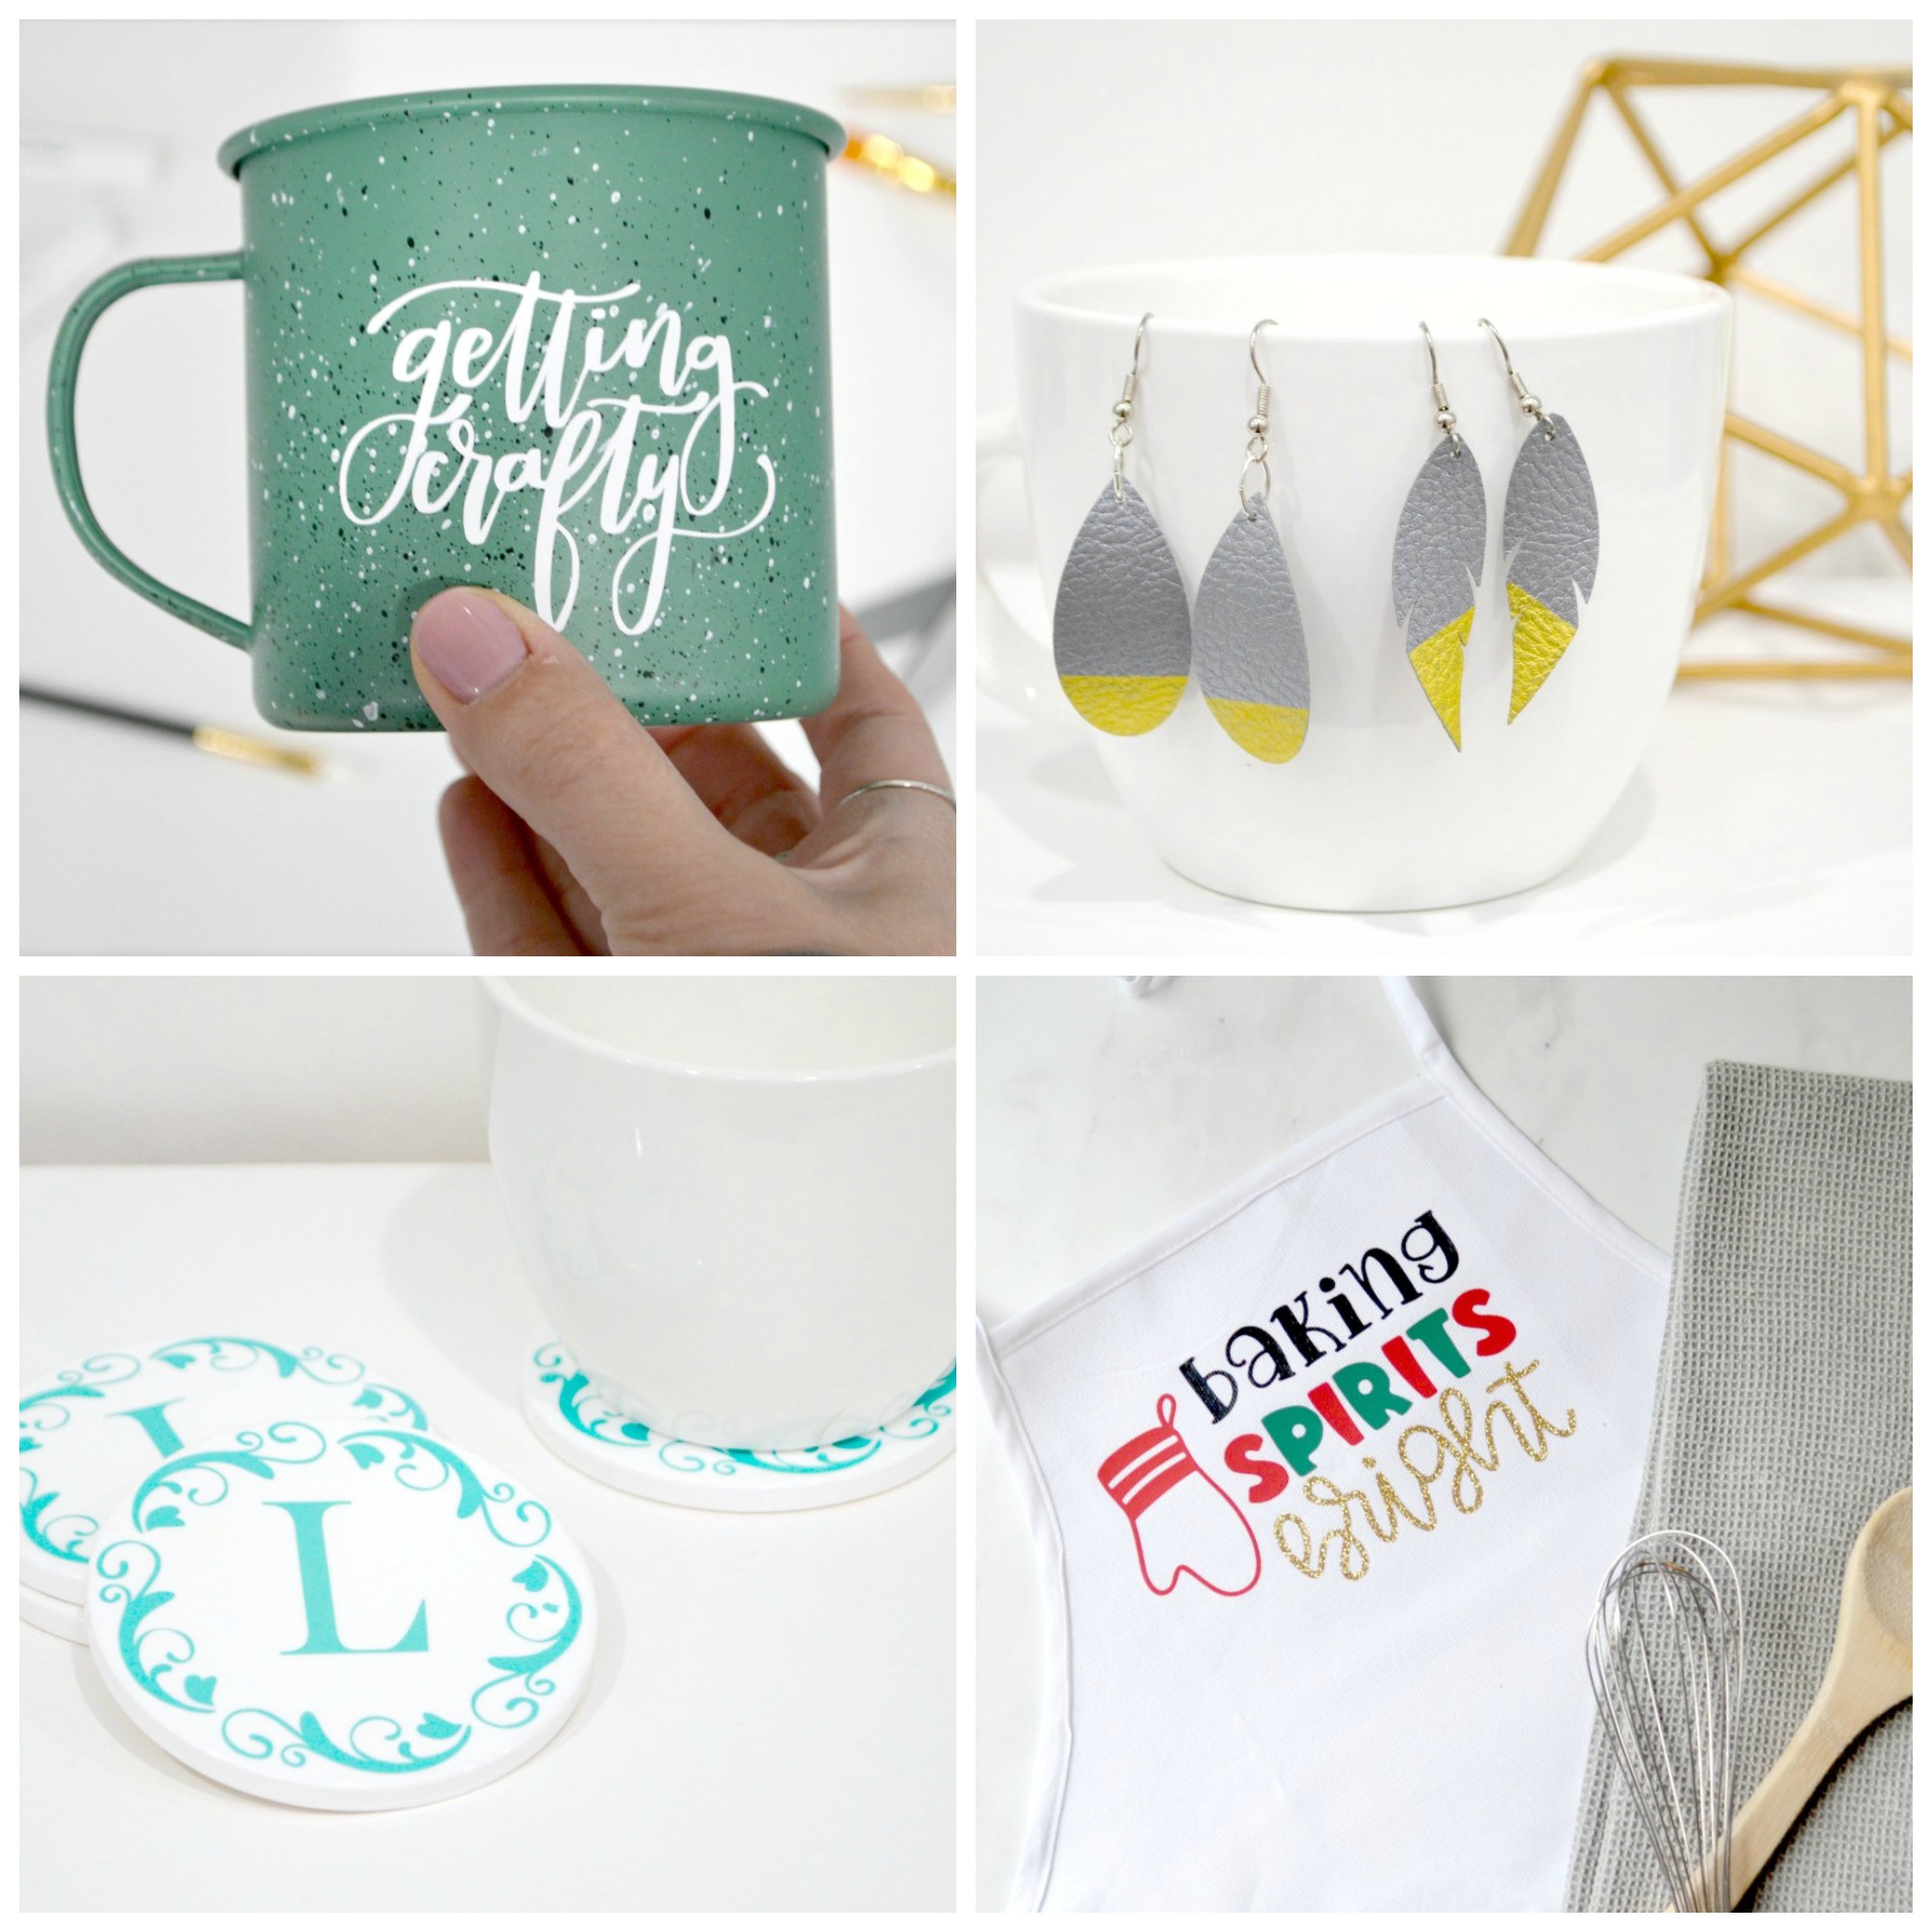 33 Personalized Gifts To Make With Cricut - Anika's DIY Life